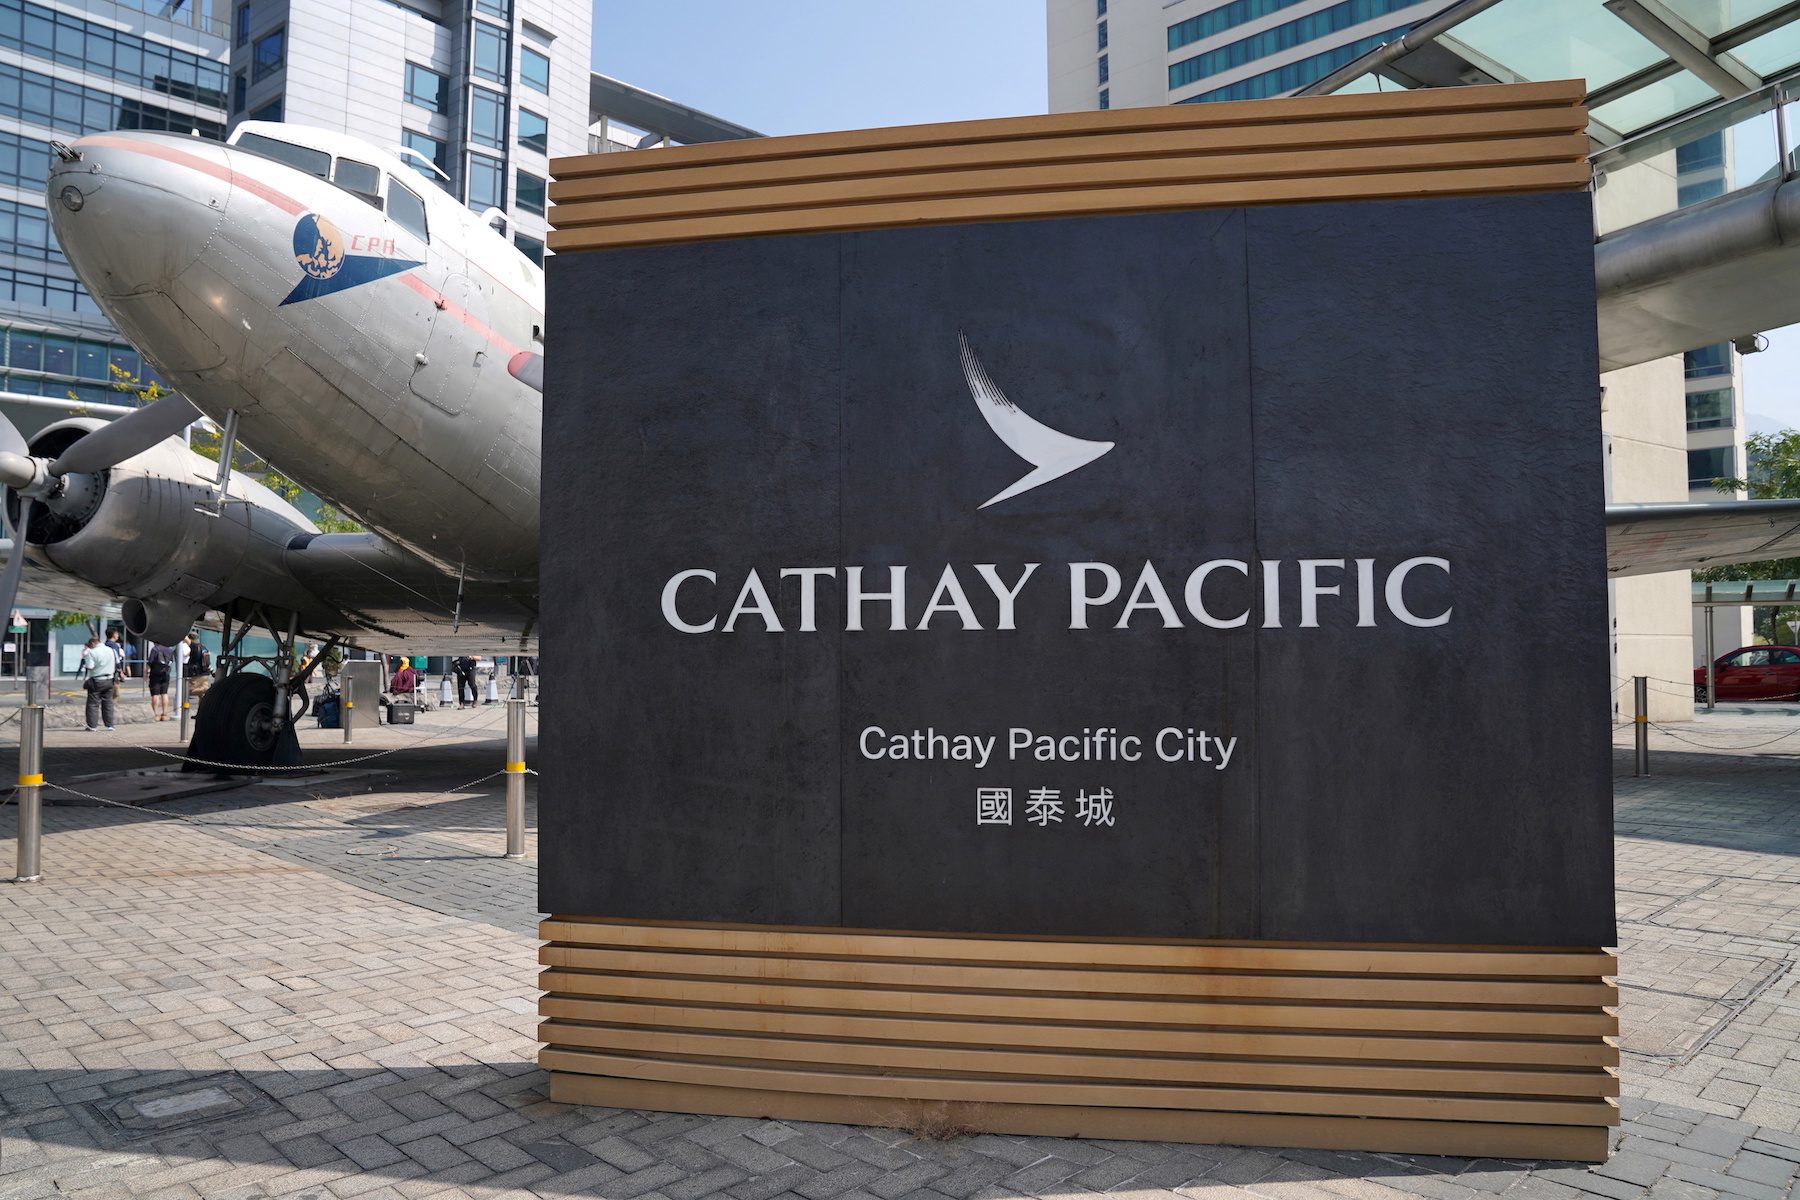 11 injured in Cathay Pacific flight incident in Hong Kong